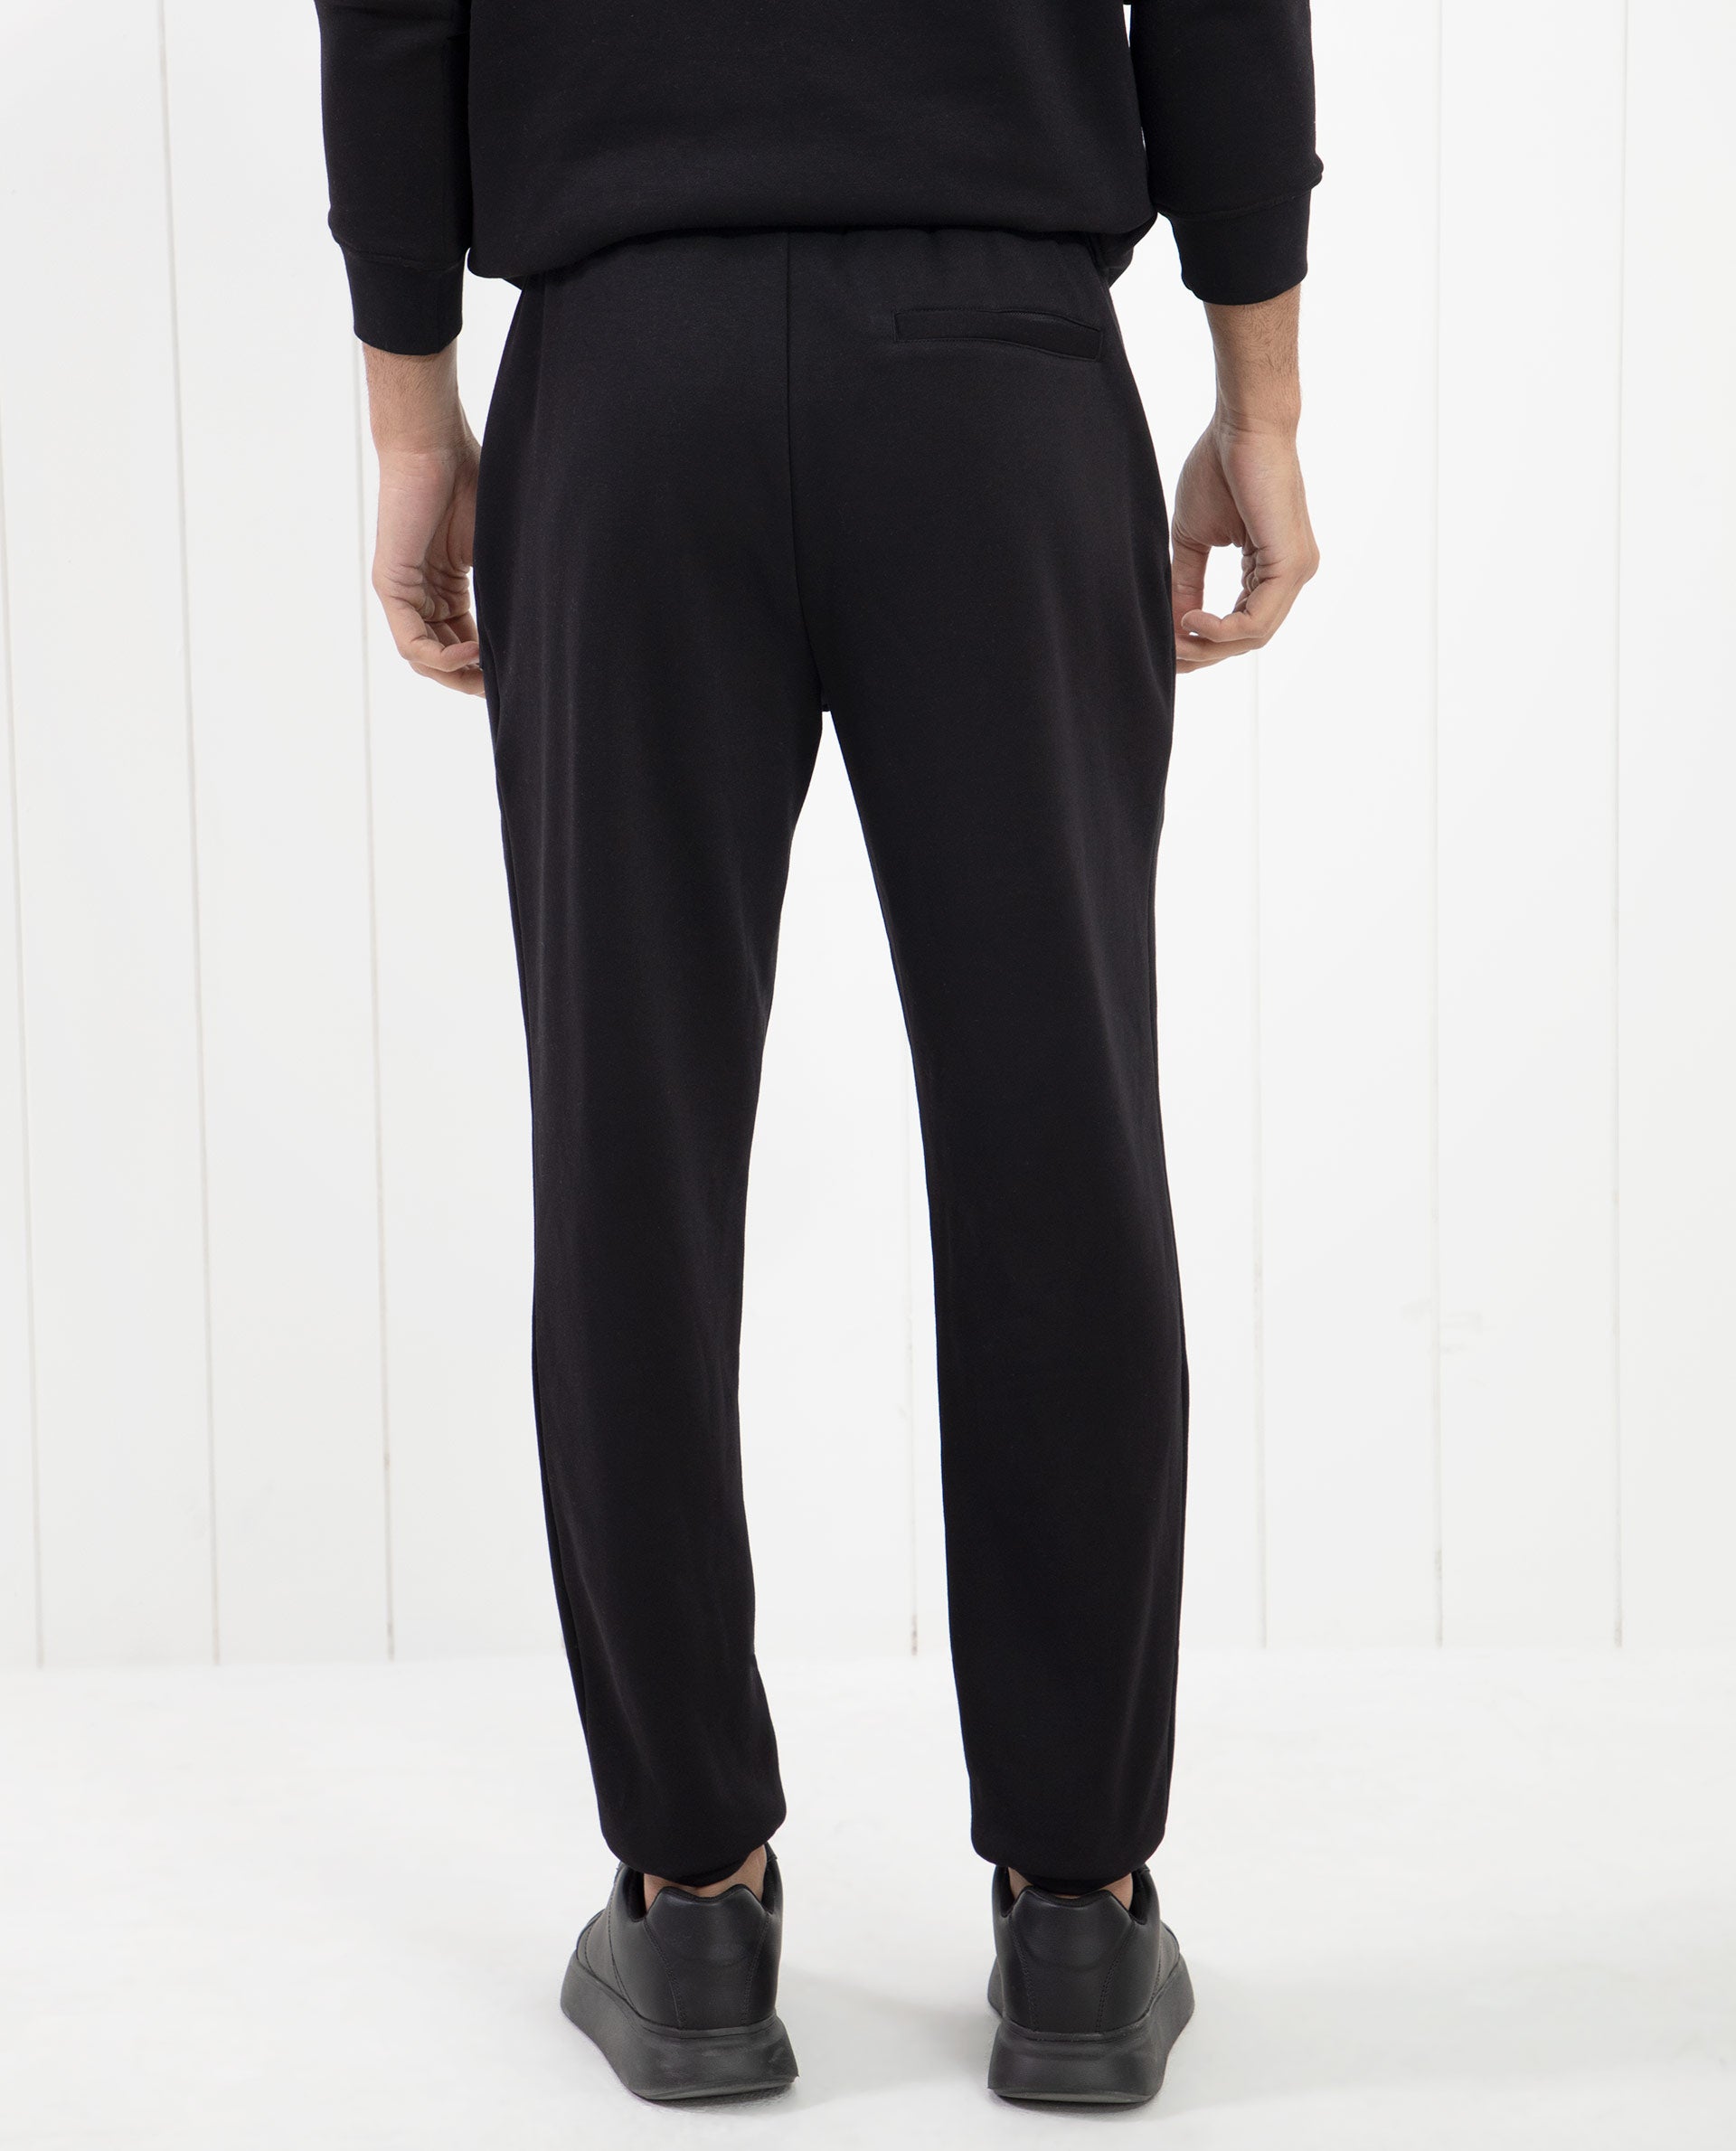 Buy Track Pant for Women with Pocket & Drawstring Closure - Black